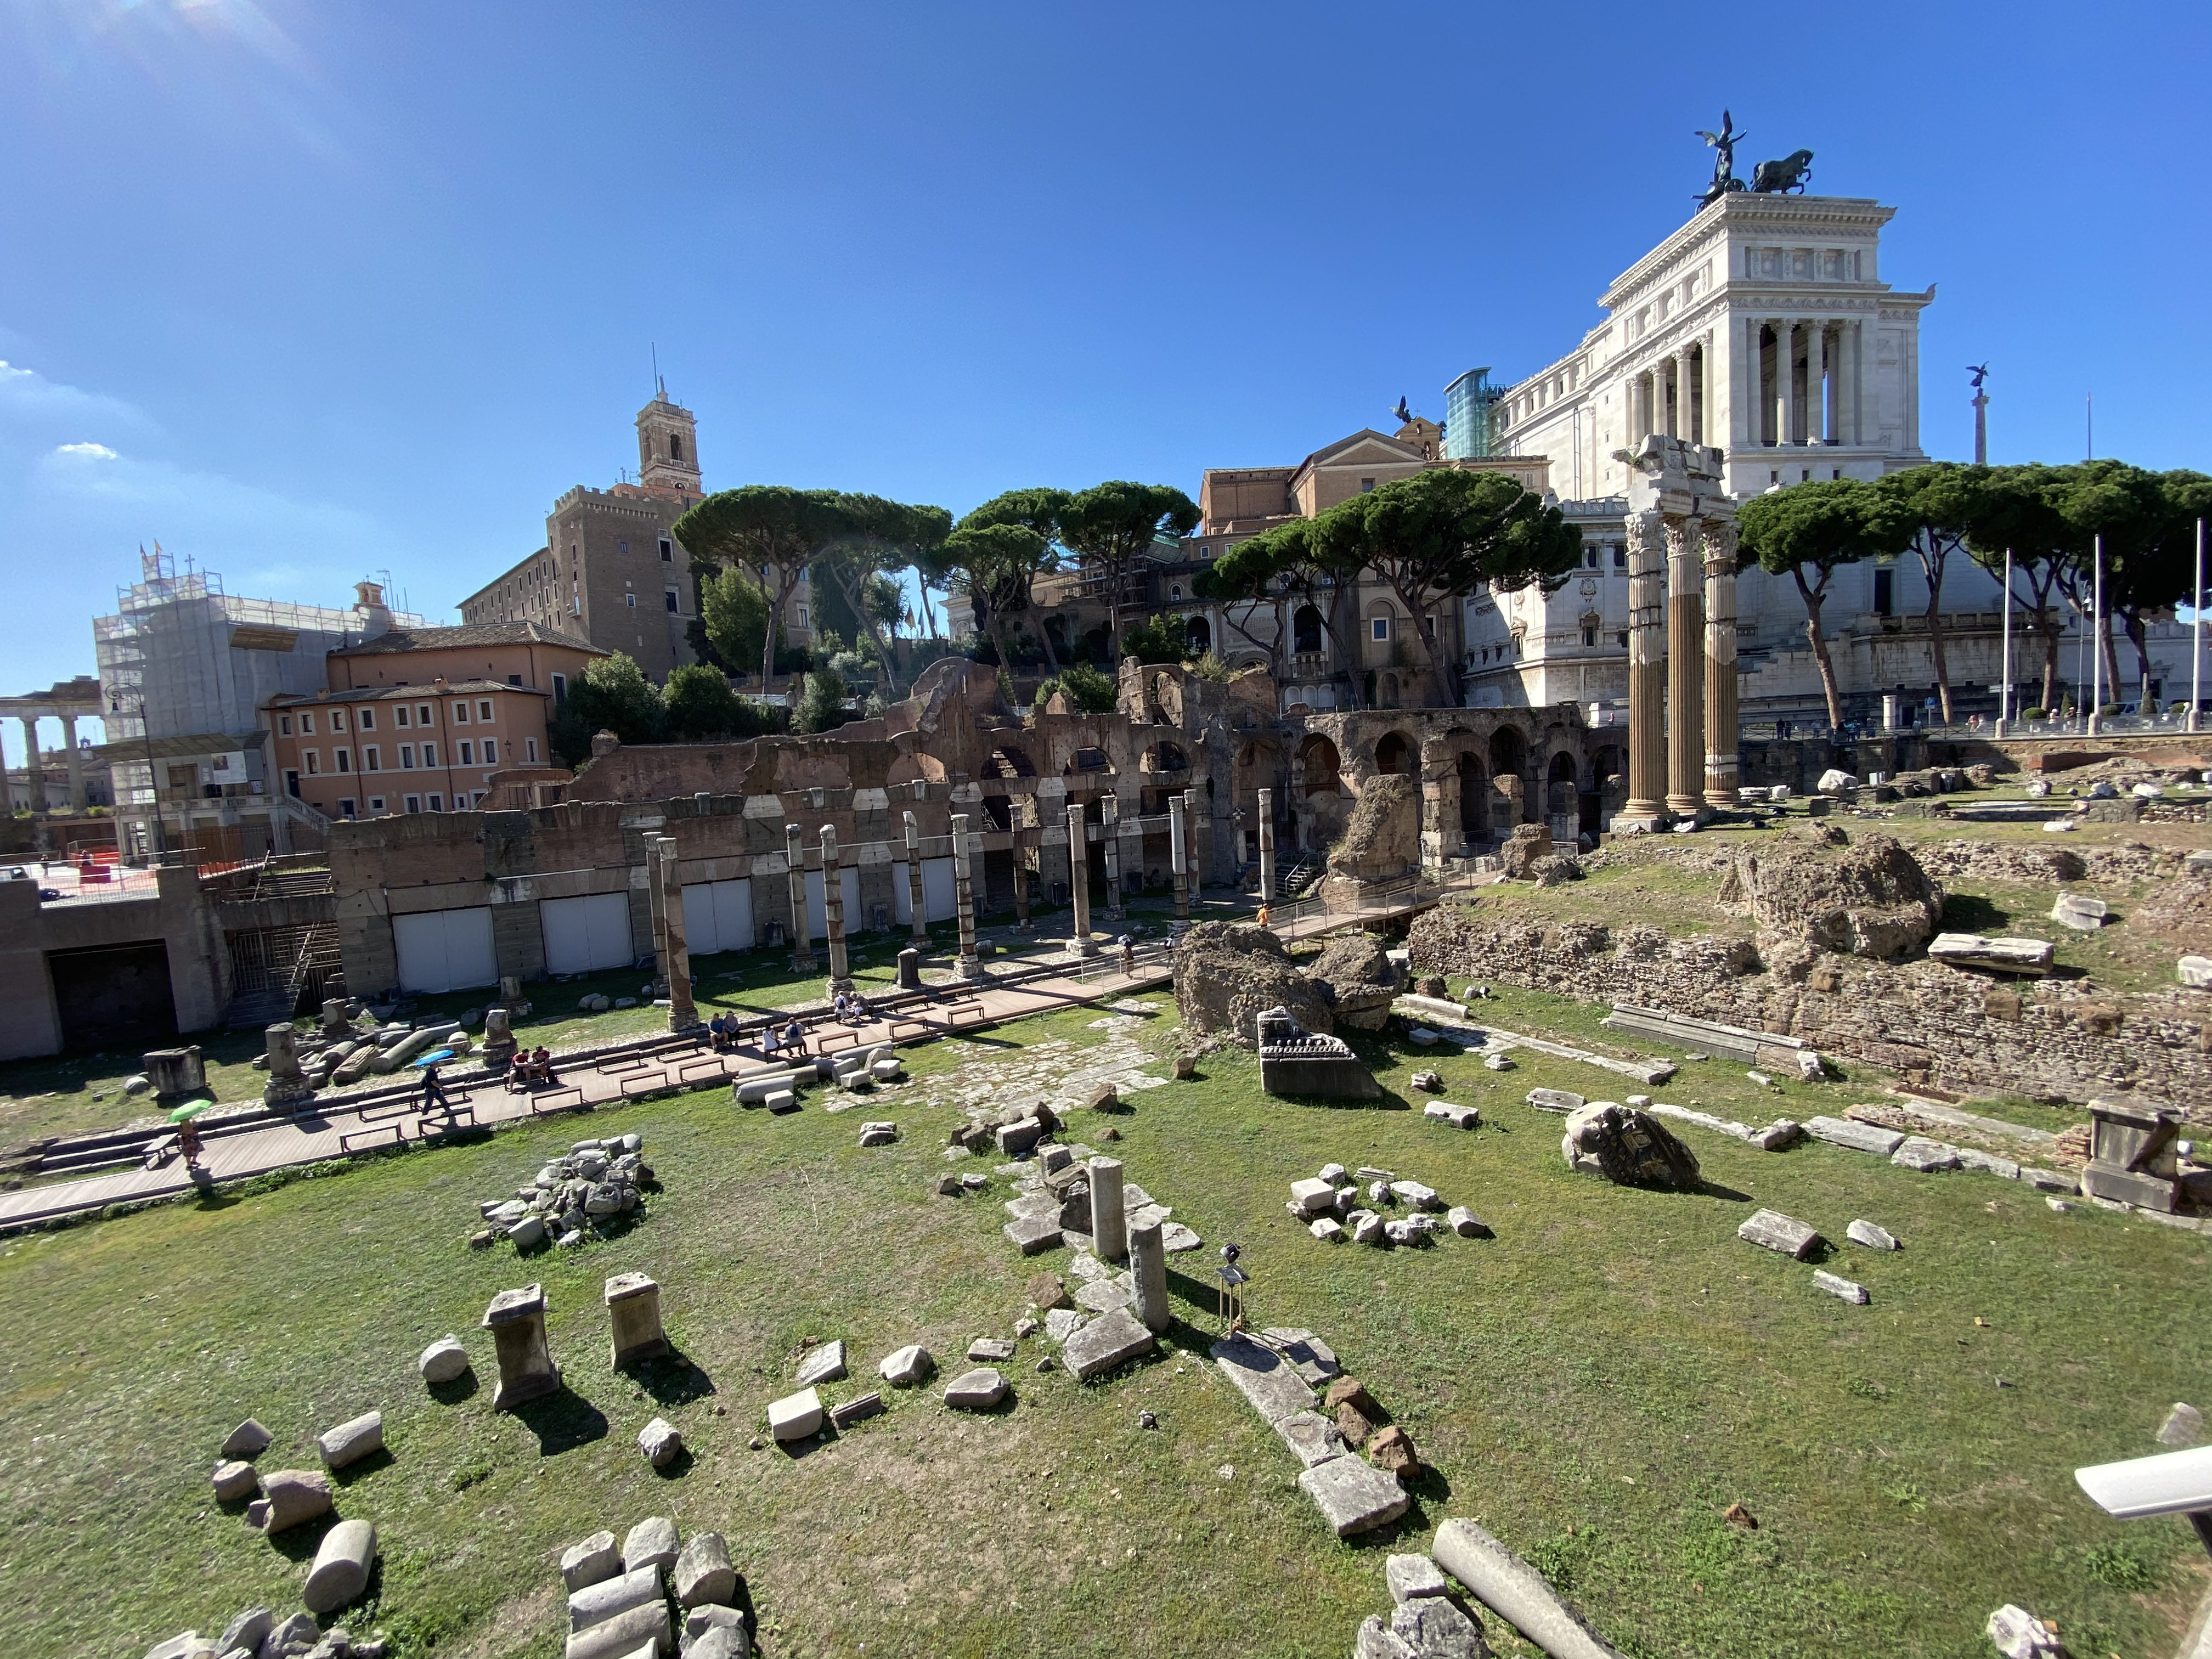 The Forum of Caesar in all its ultra-wide glory.